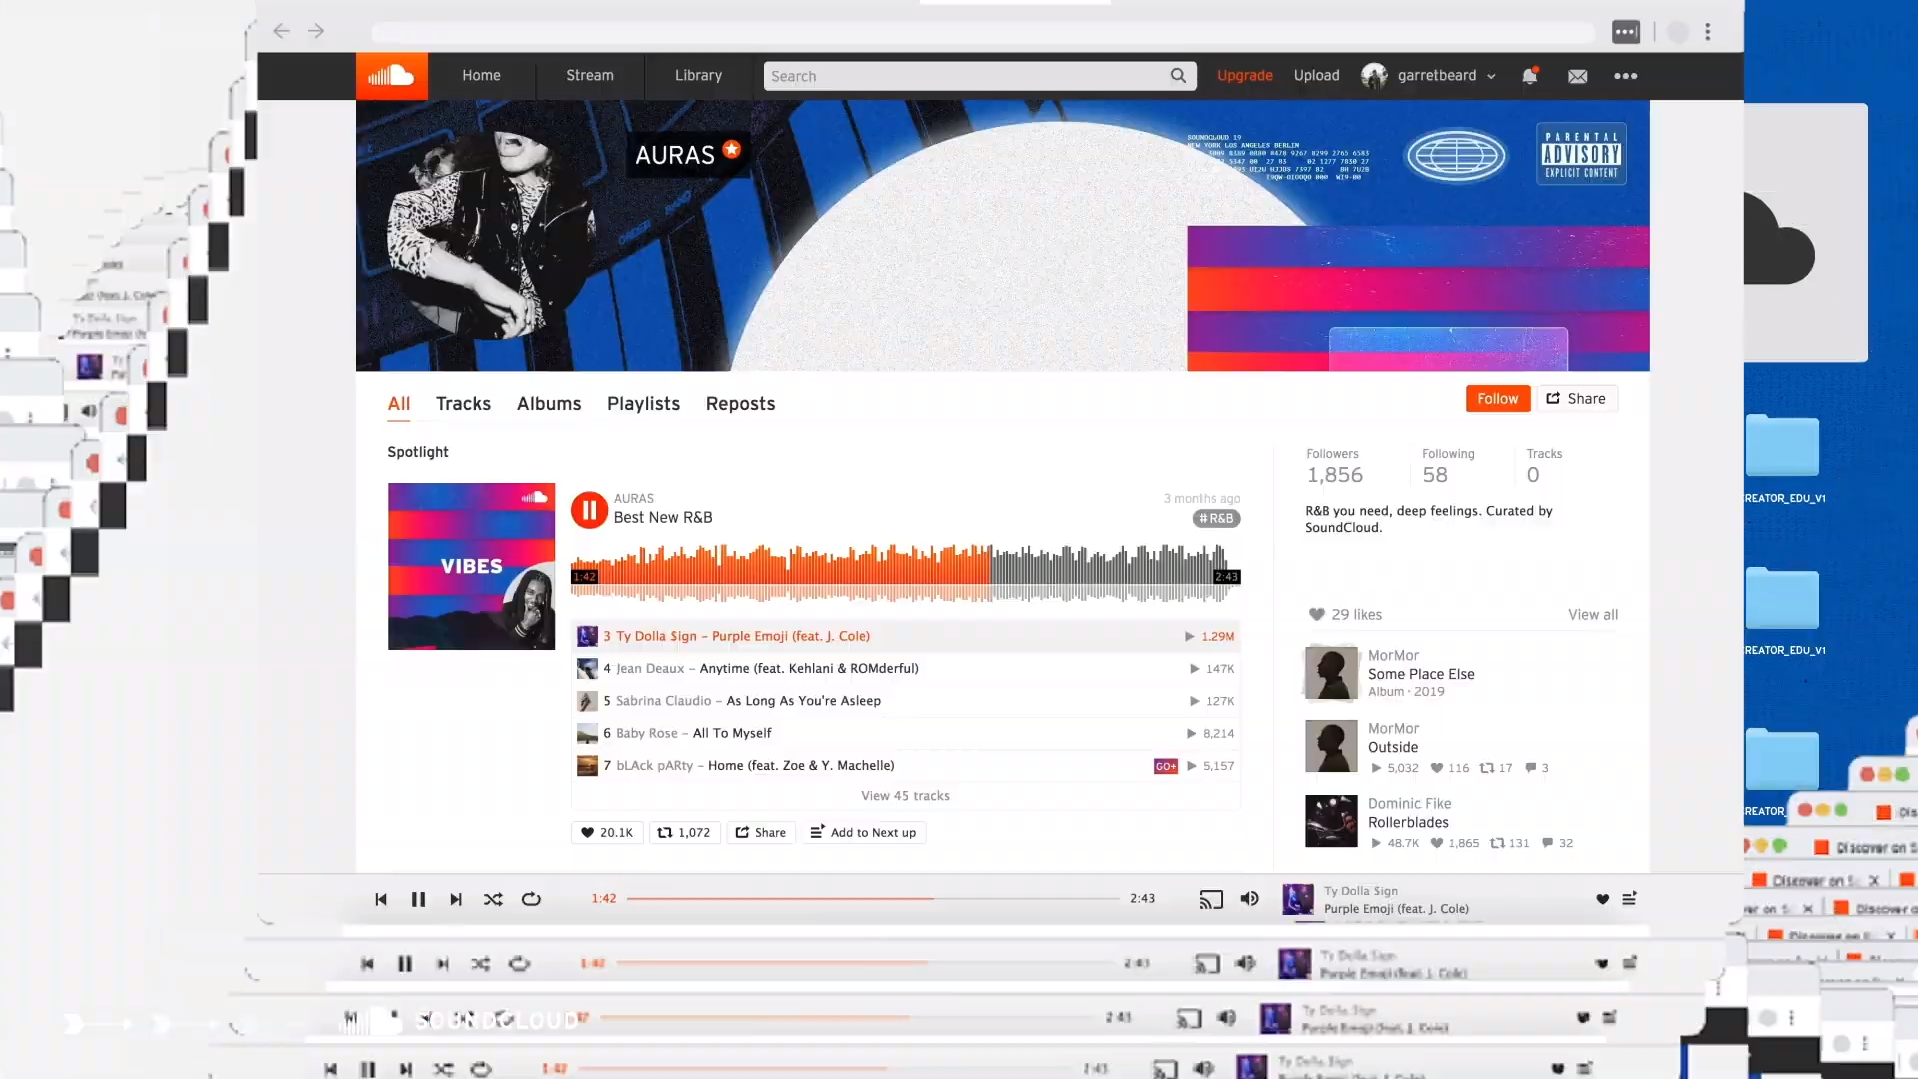 How to see your real-time stats on SoundCloud